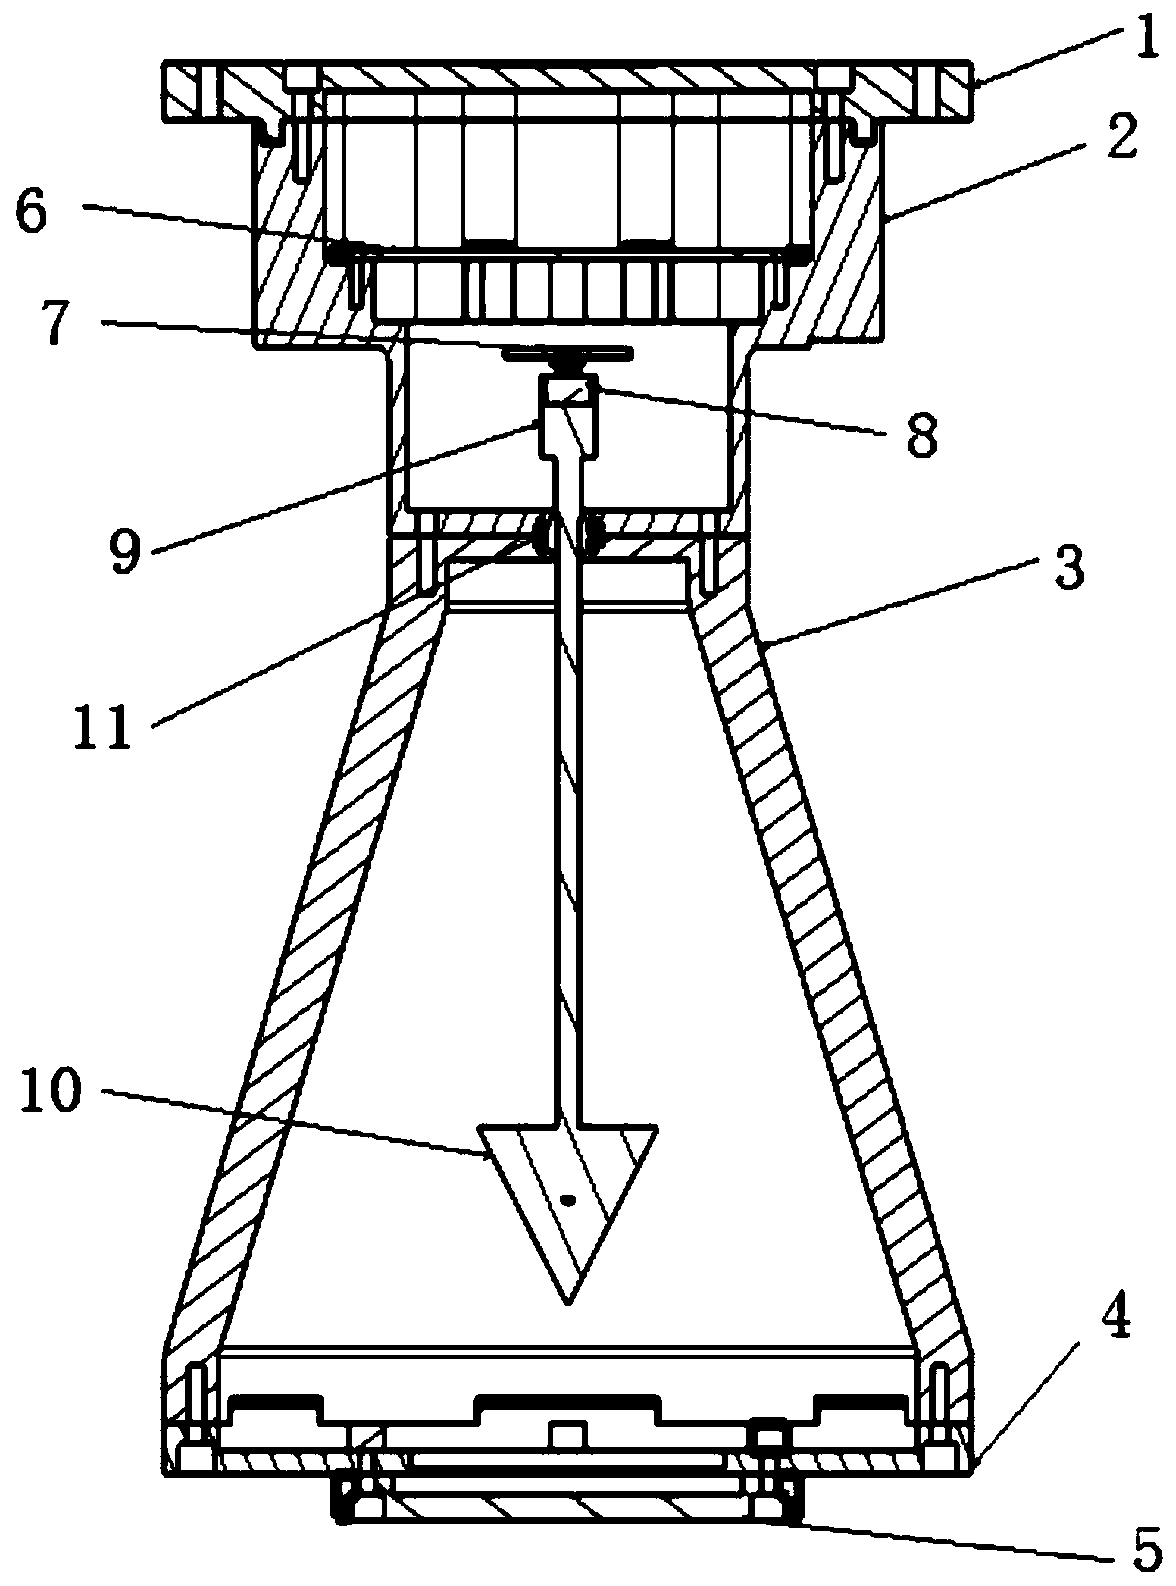 System for measuring inclination angle of wind power tower based on three-dimensional Hall sensor